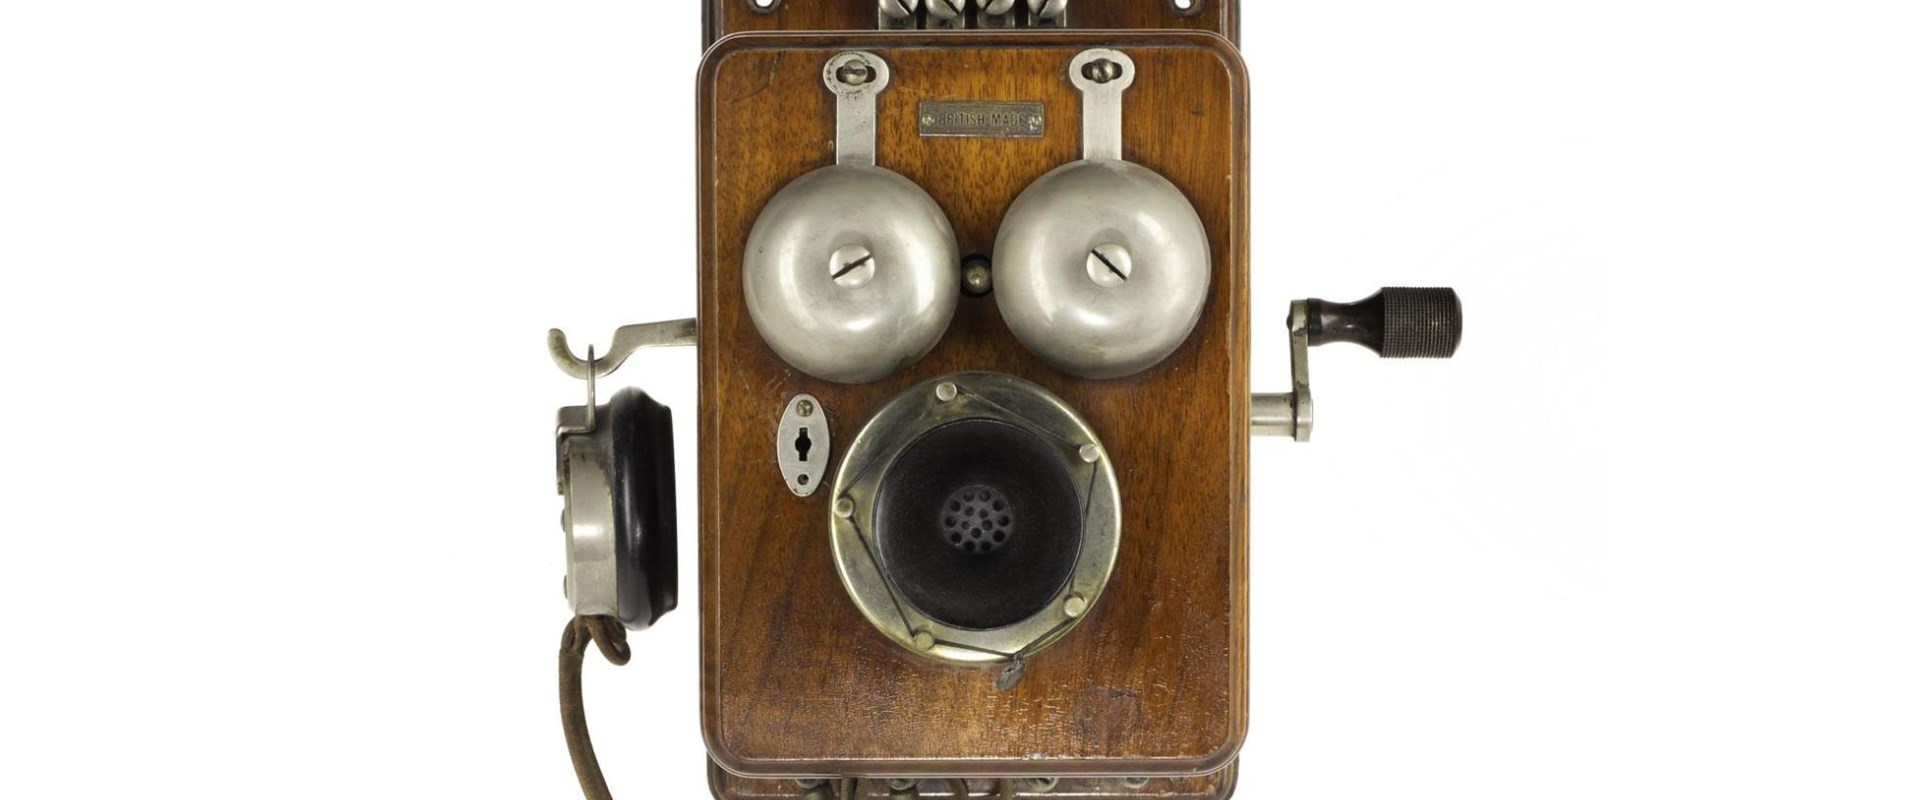 Wooden wall-mounted telephone with two bells, a crank, and an earpiece hanging from the side.